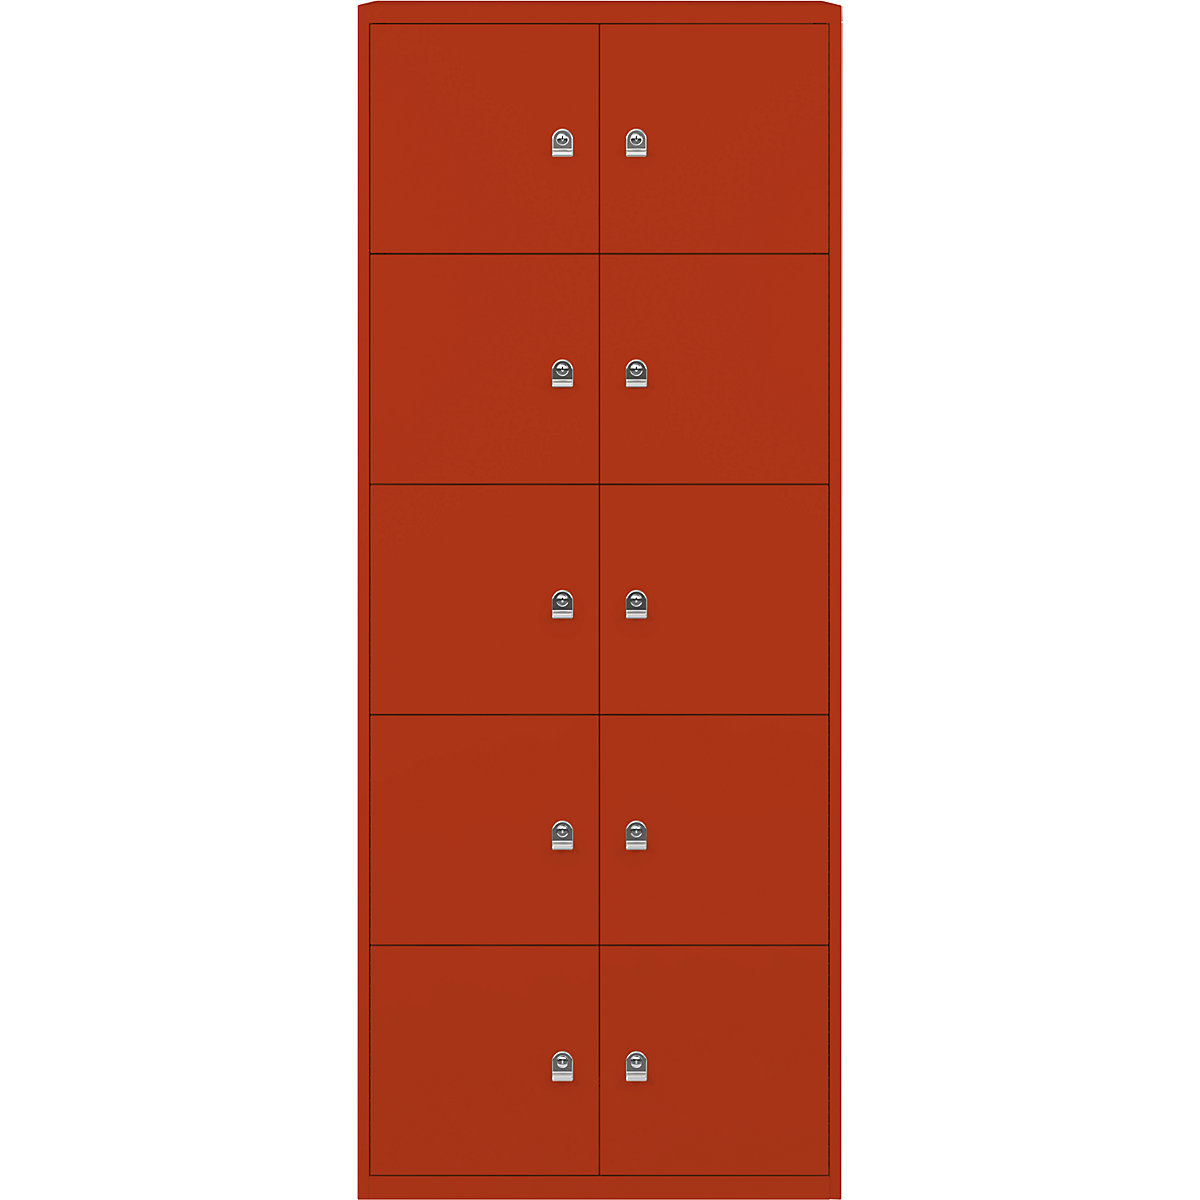 LateralFile™ lodge – BISLEY, with 10 lockable compartments, height 375 mm each, sevilla